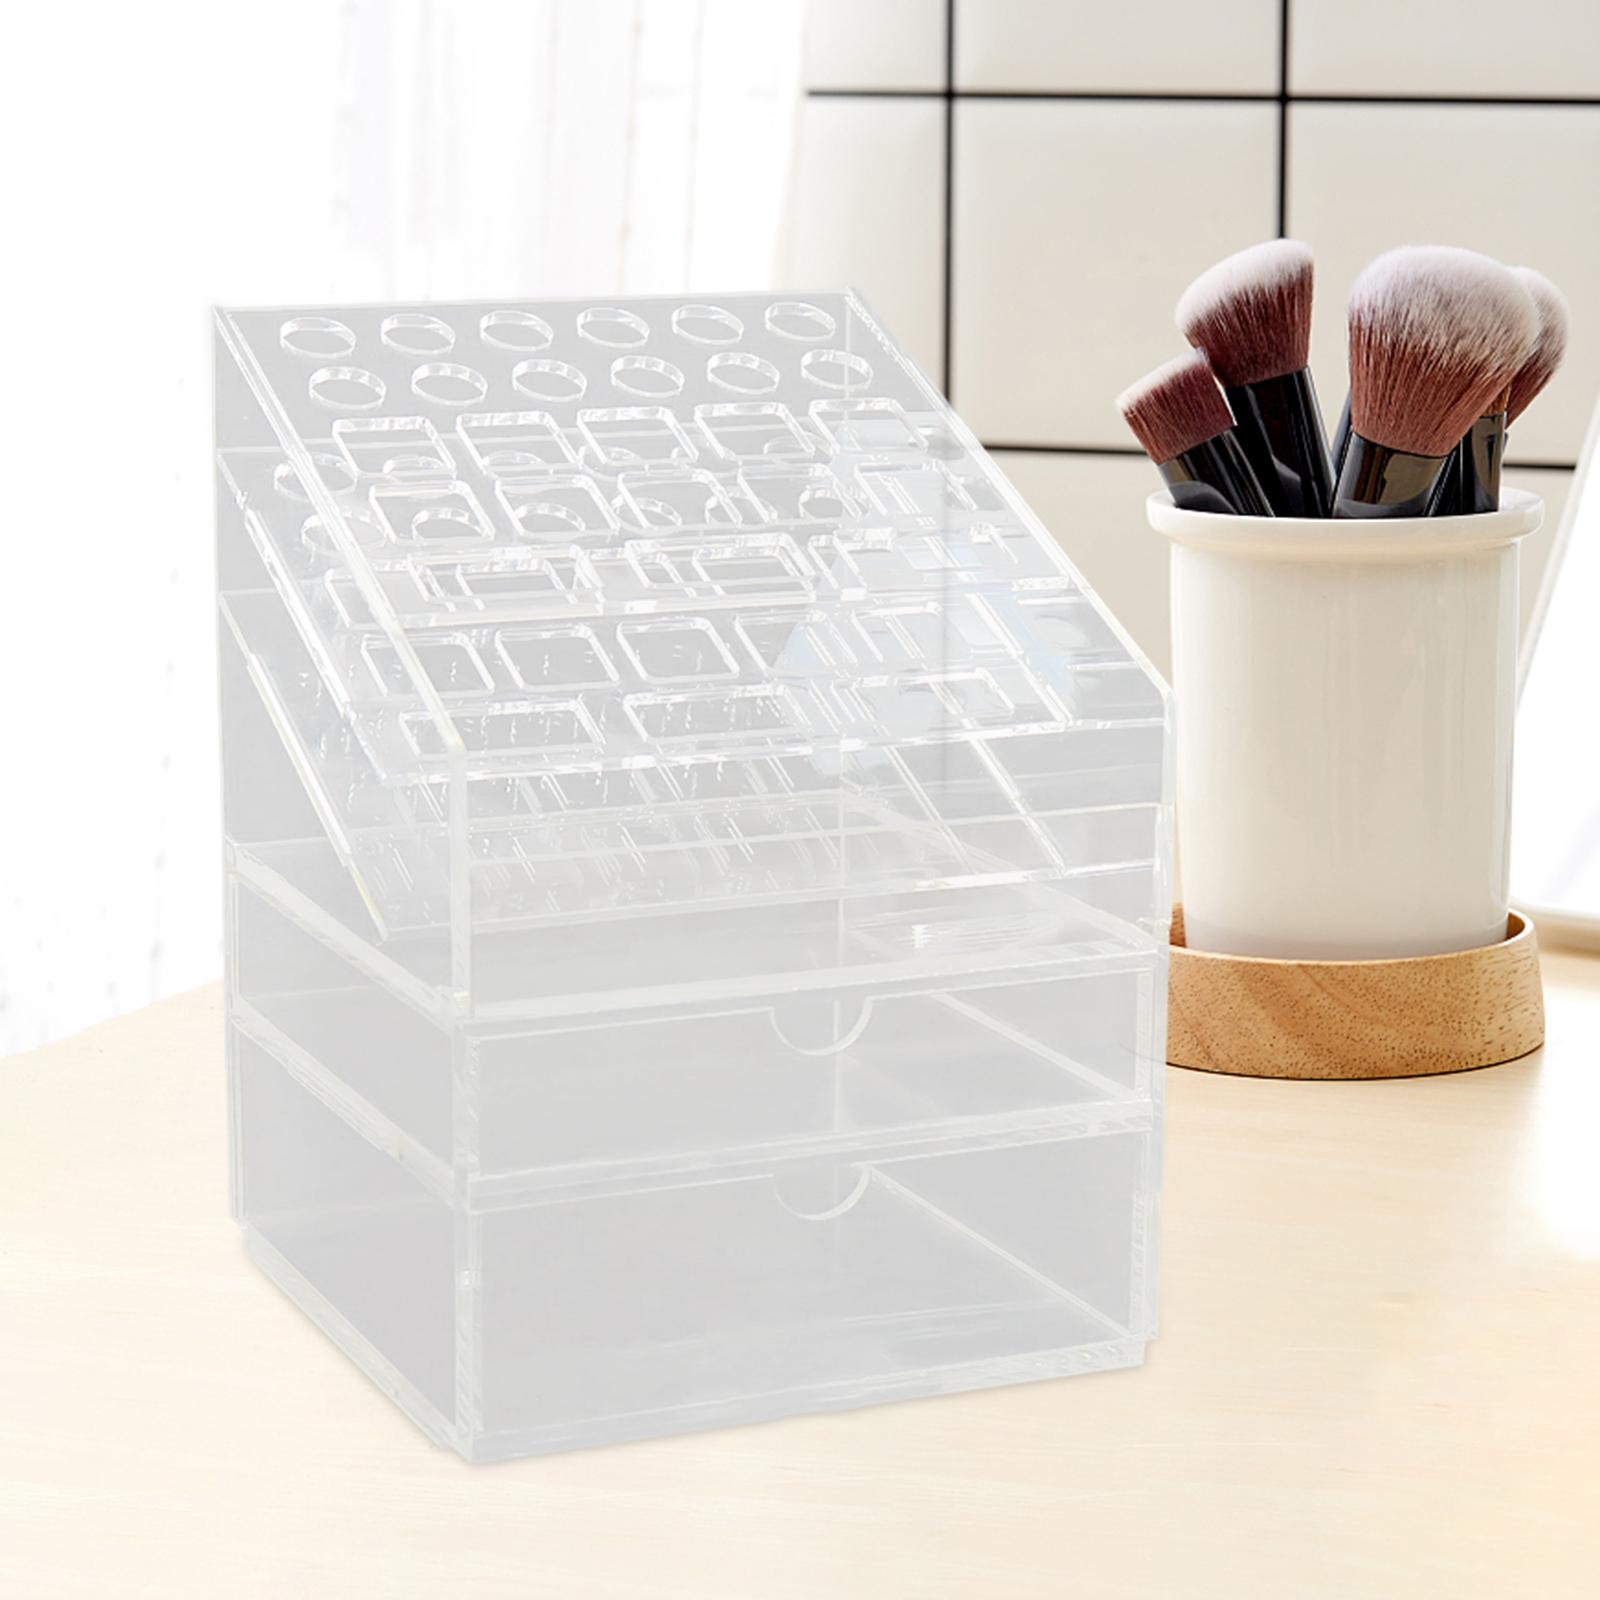 Clear Pen Holder Desk Pencil Organizer for Home Tabletop Organization Office 24x15x15cm 2 Drawers